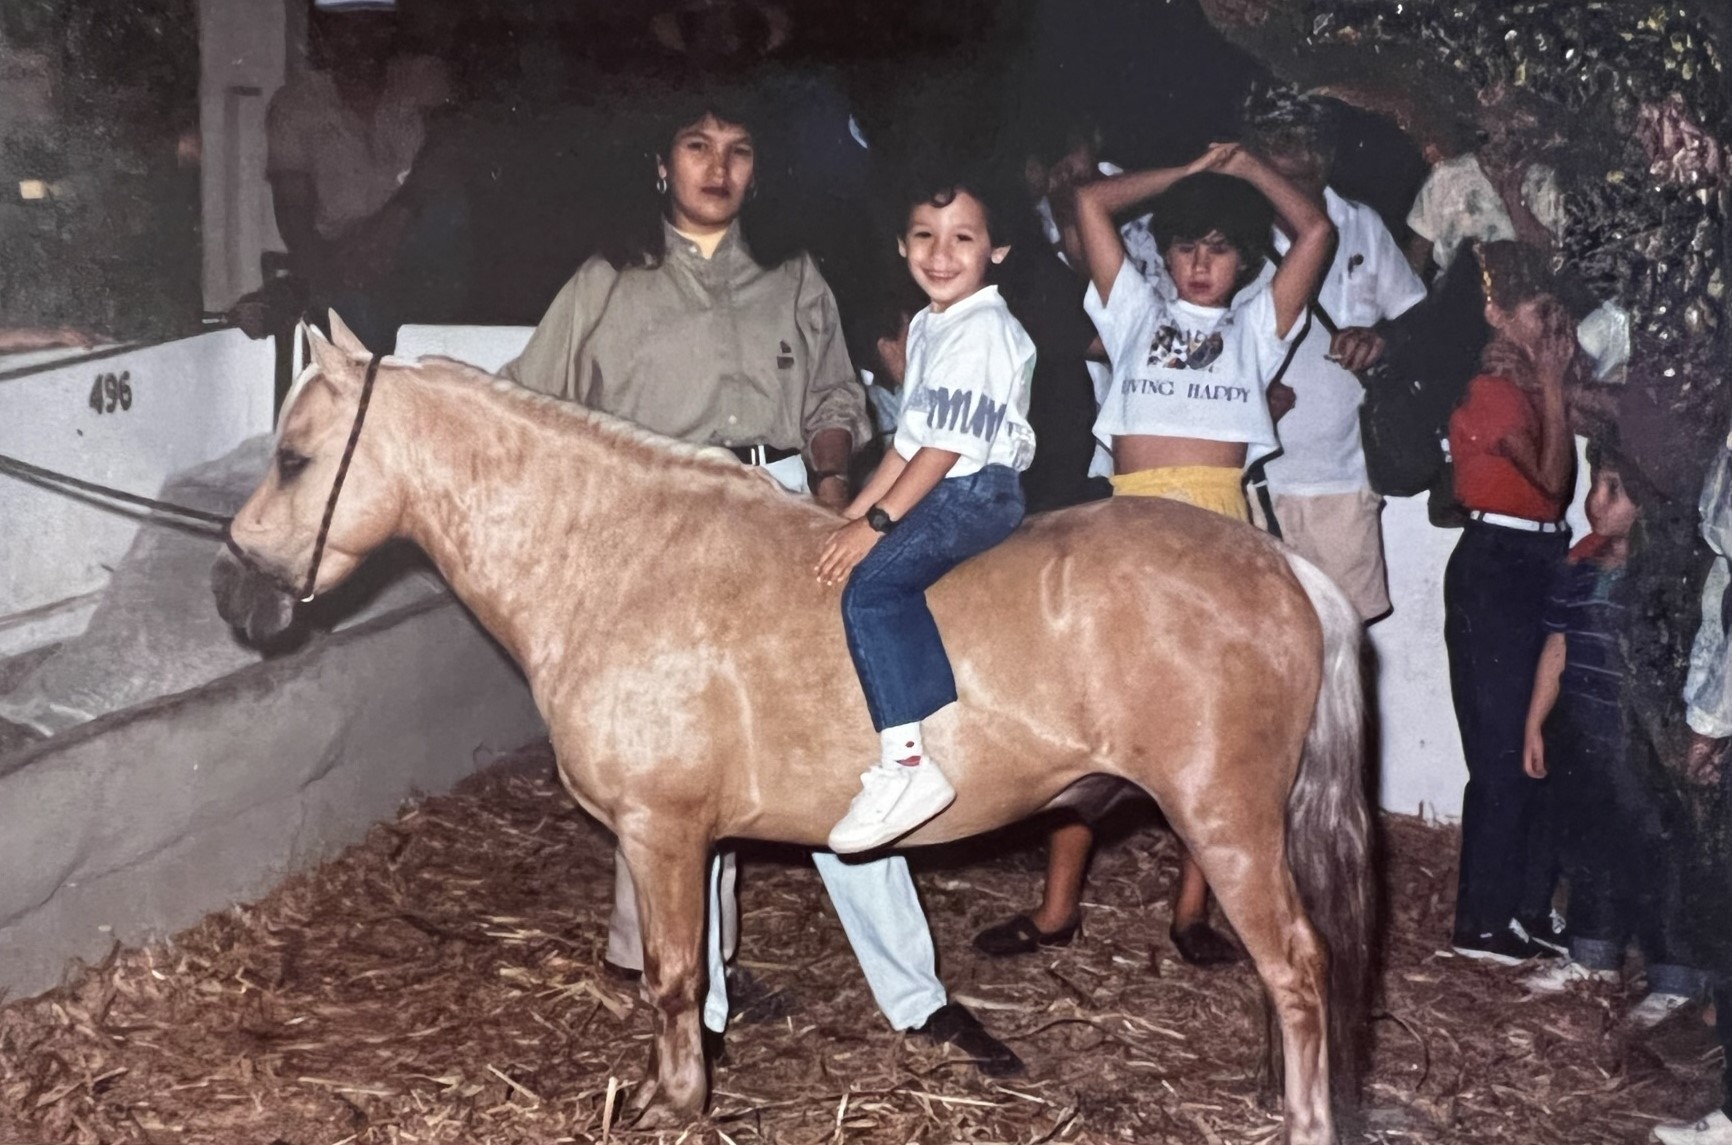 Photo of Julian from childhood with his mom. Julian sits on a horse